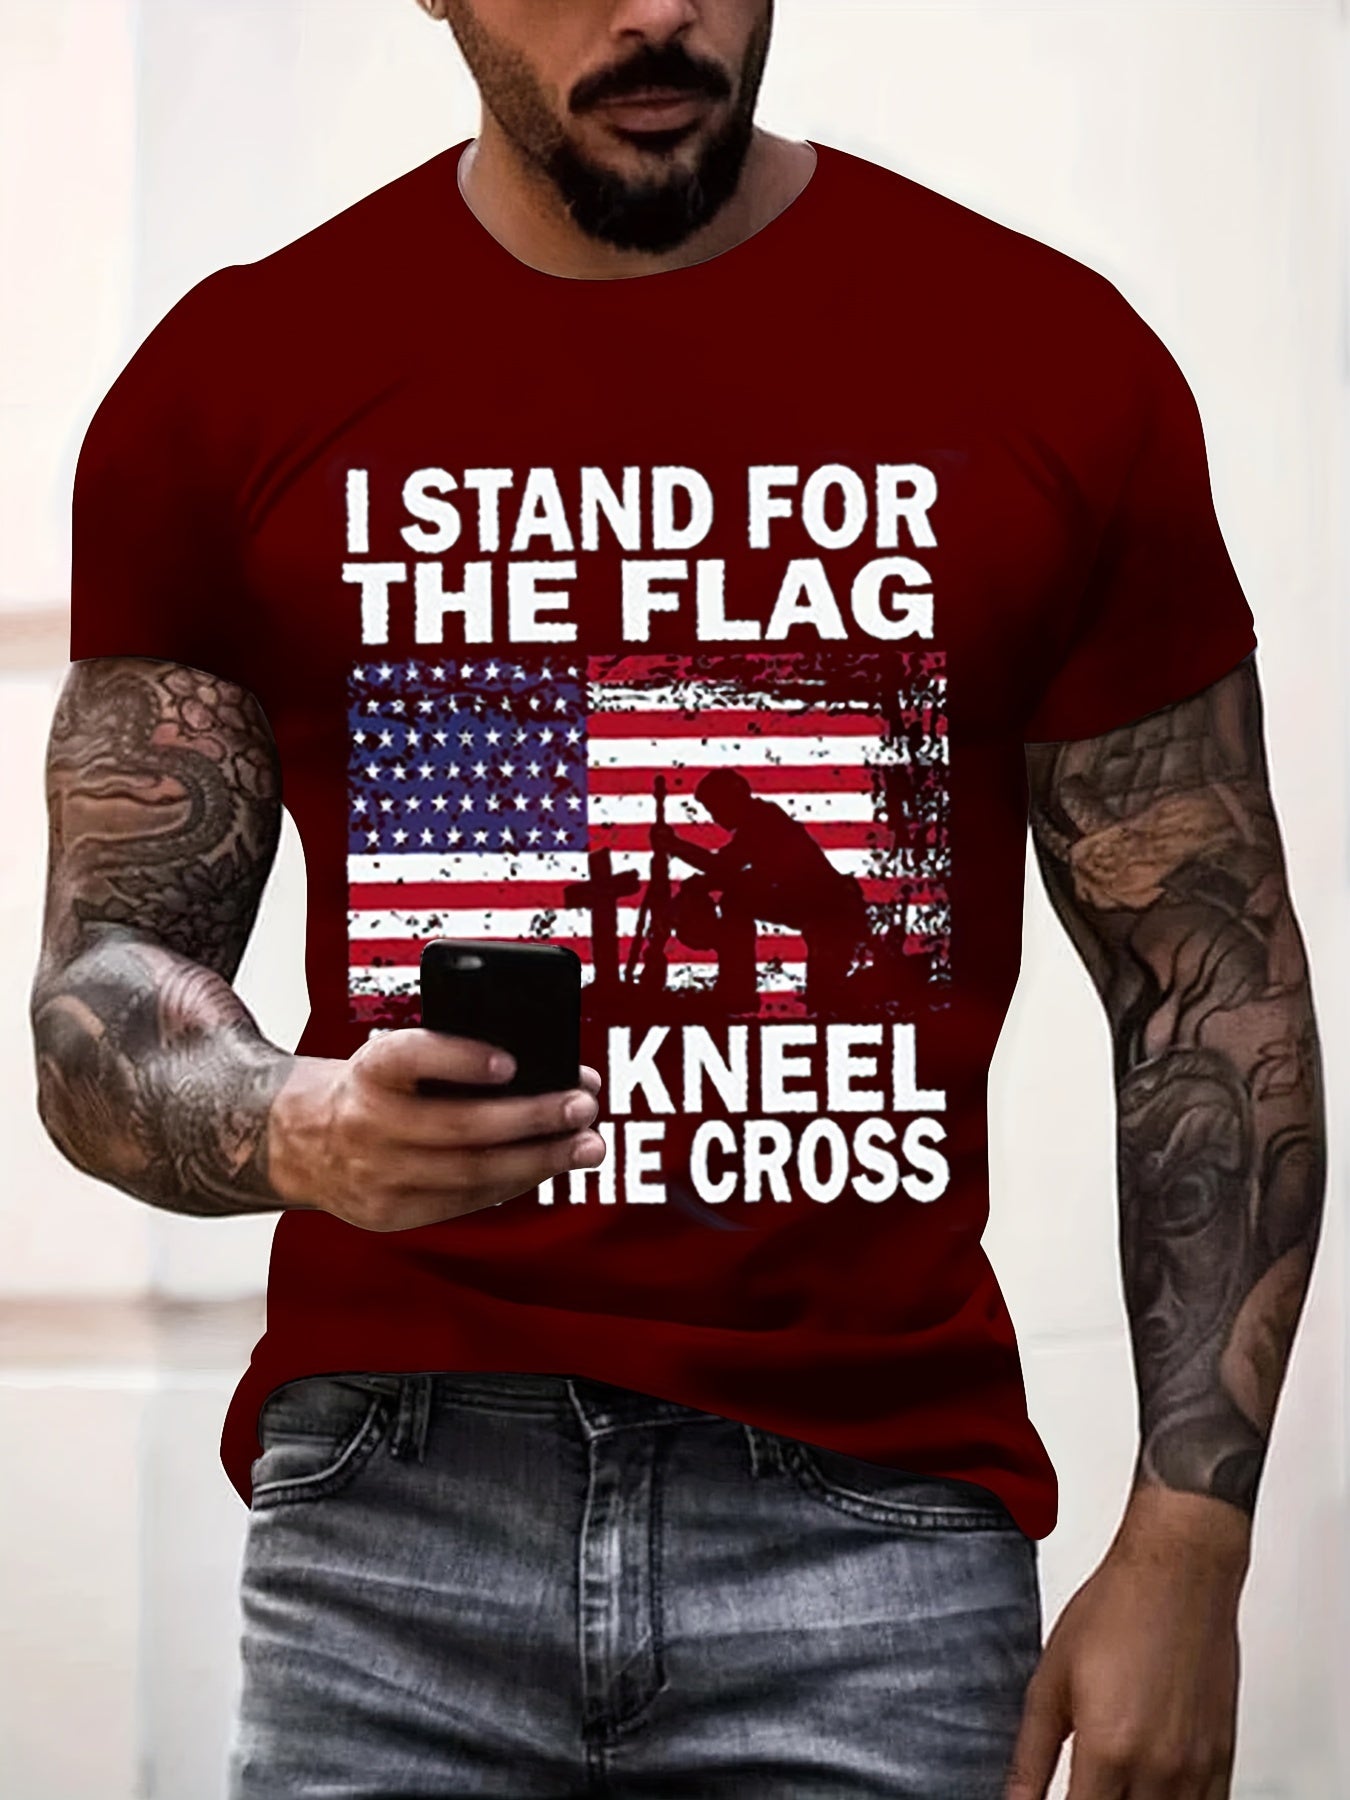 I Stand For The Flag And Kneel For The Cross Patriotic American Flag Men's Christian T-shirt claimedbygoddesigns